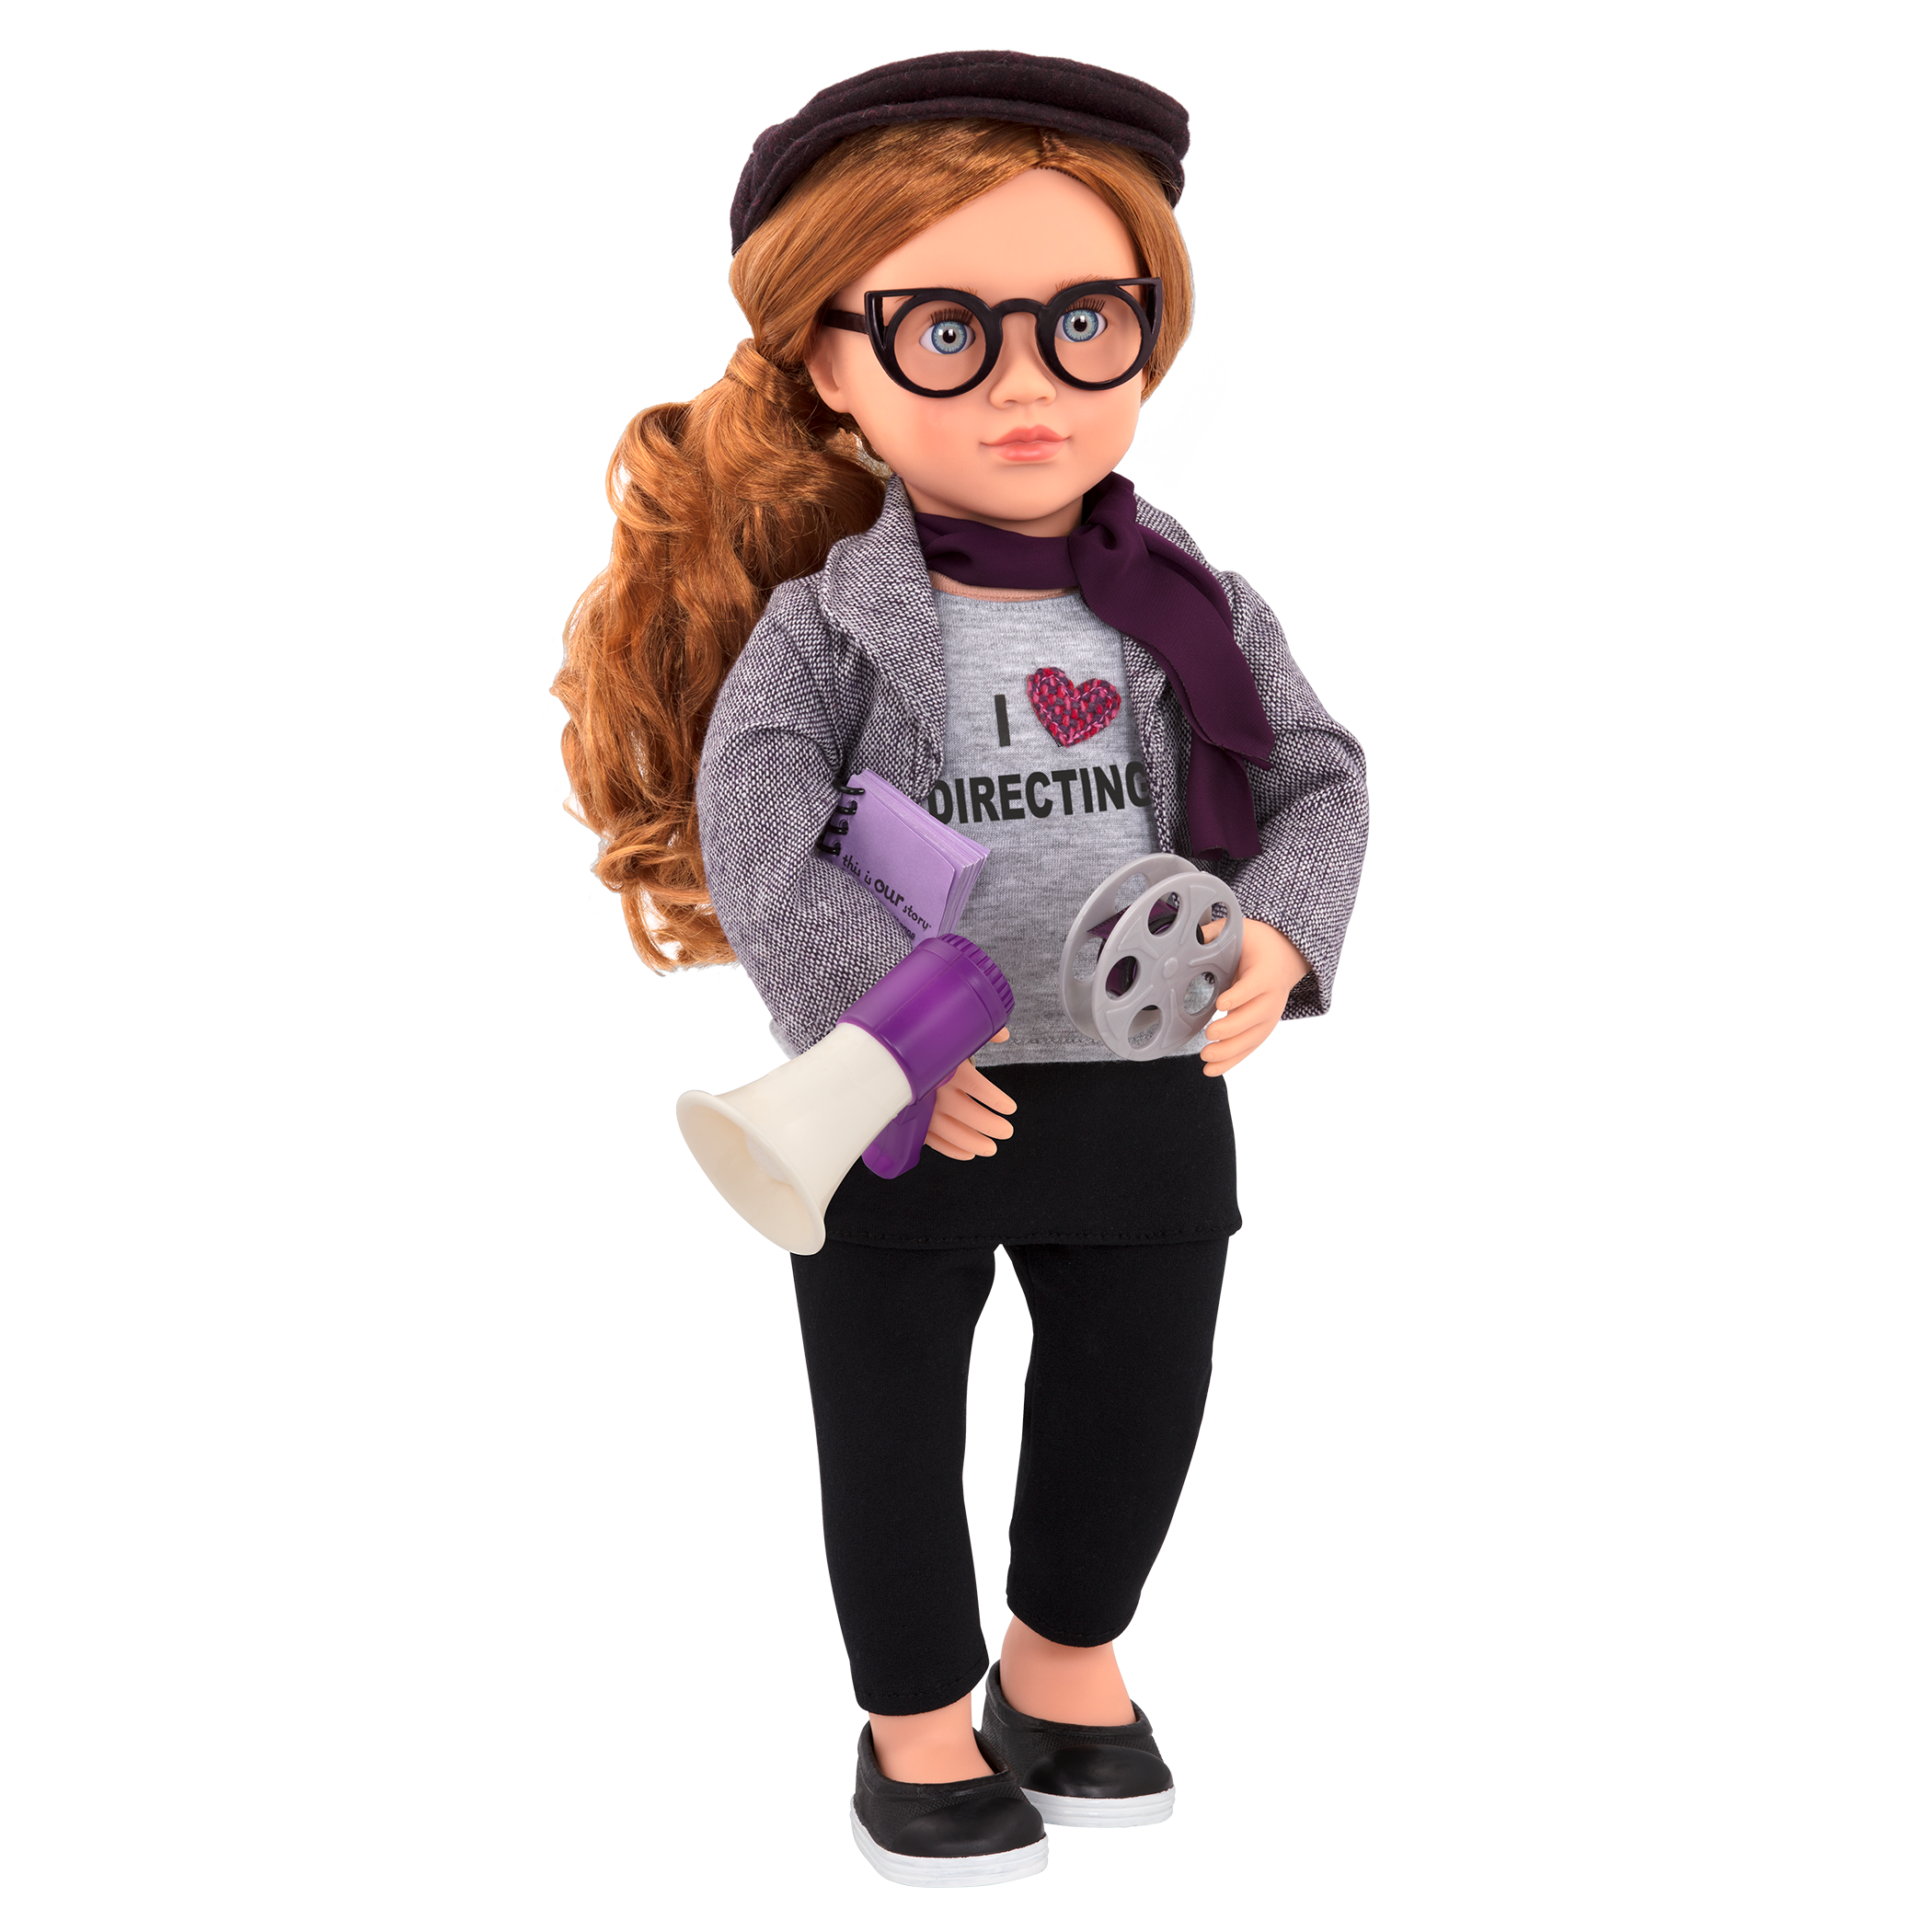 Mienna Deluxe 18-inch Movie Doll with accessories